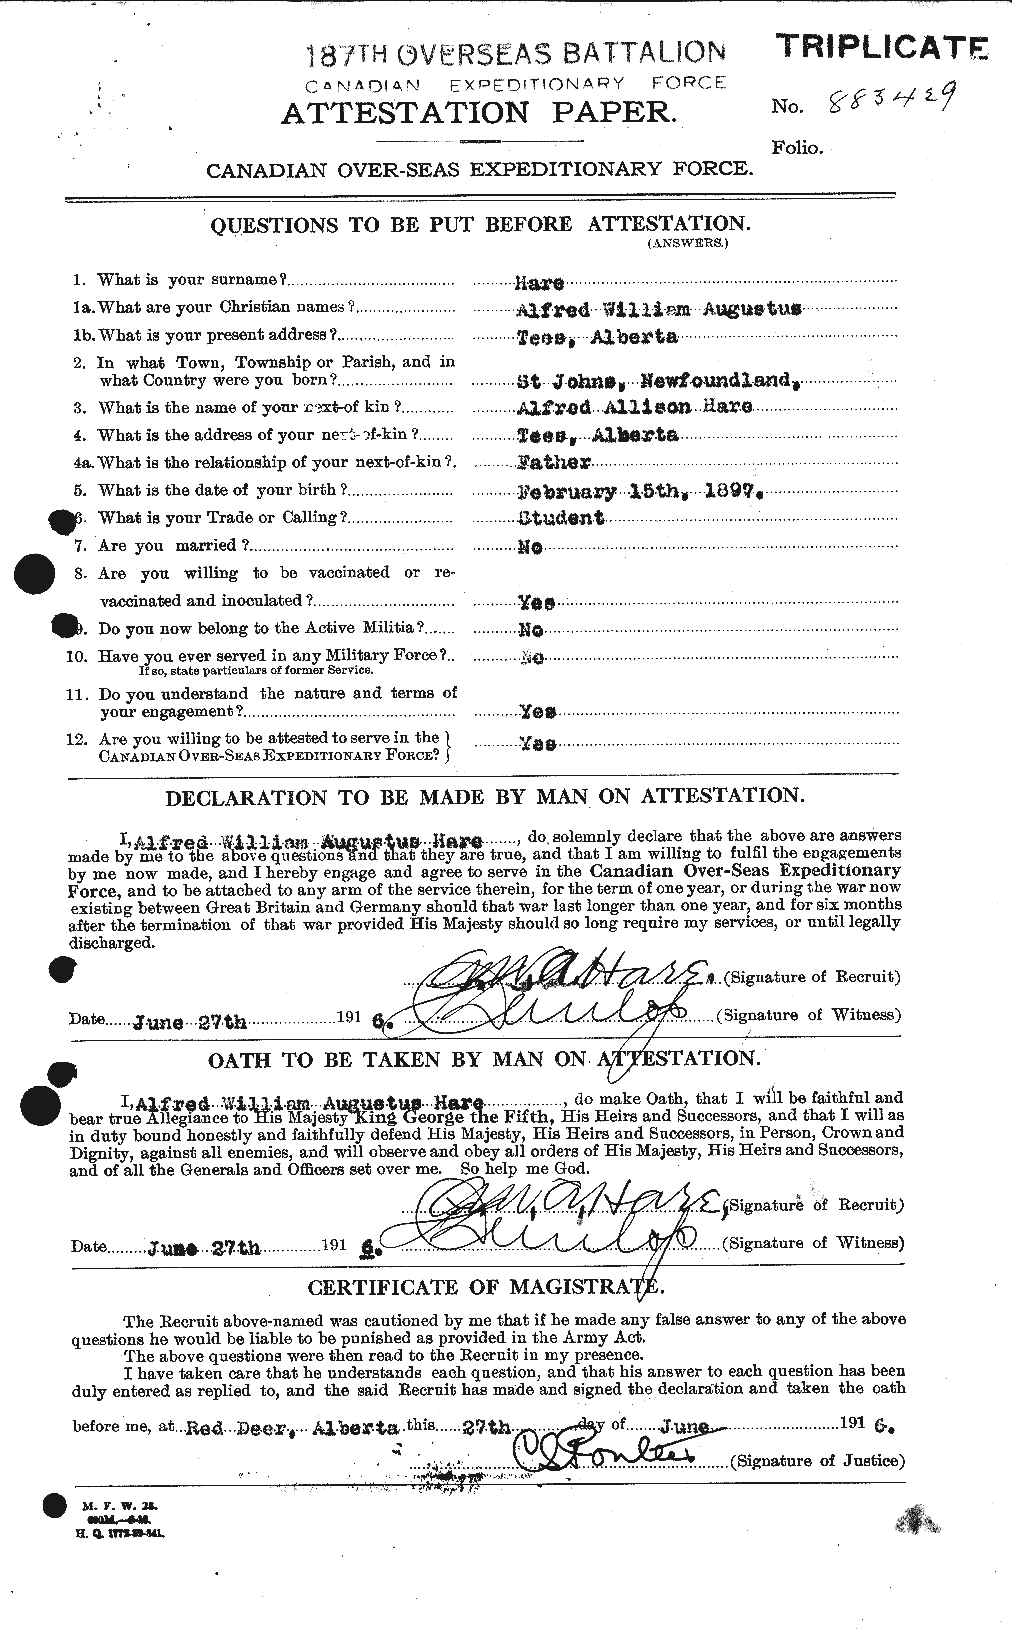 Personnel Records of the First World War - CEF 377885a